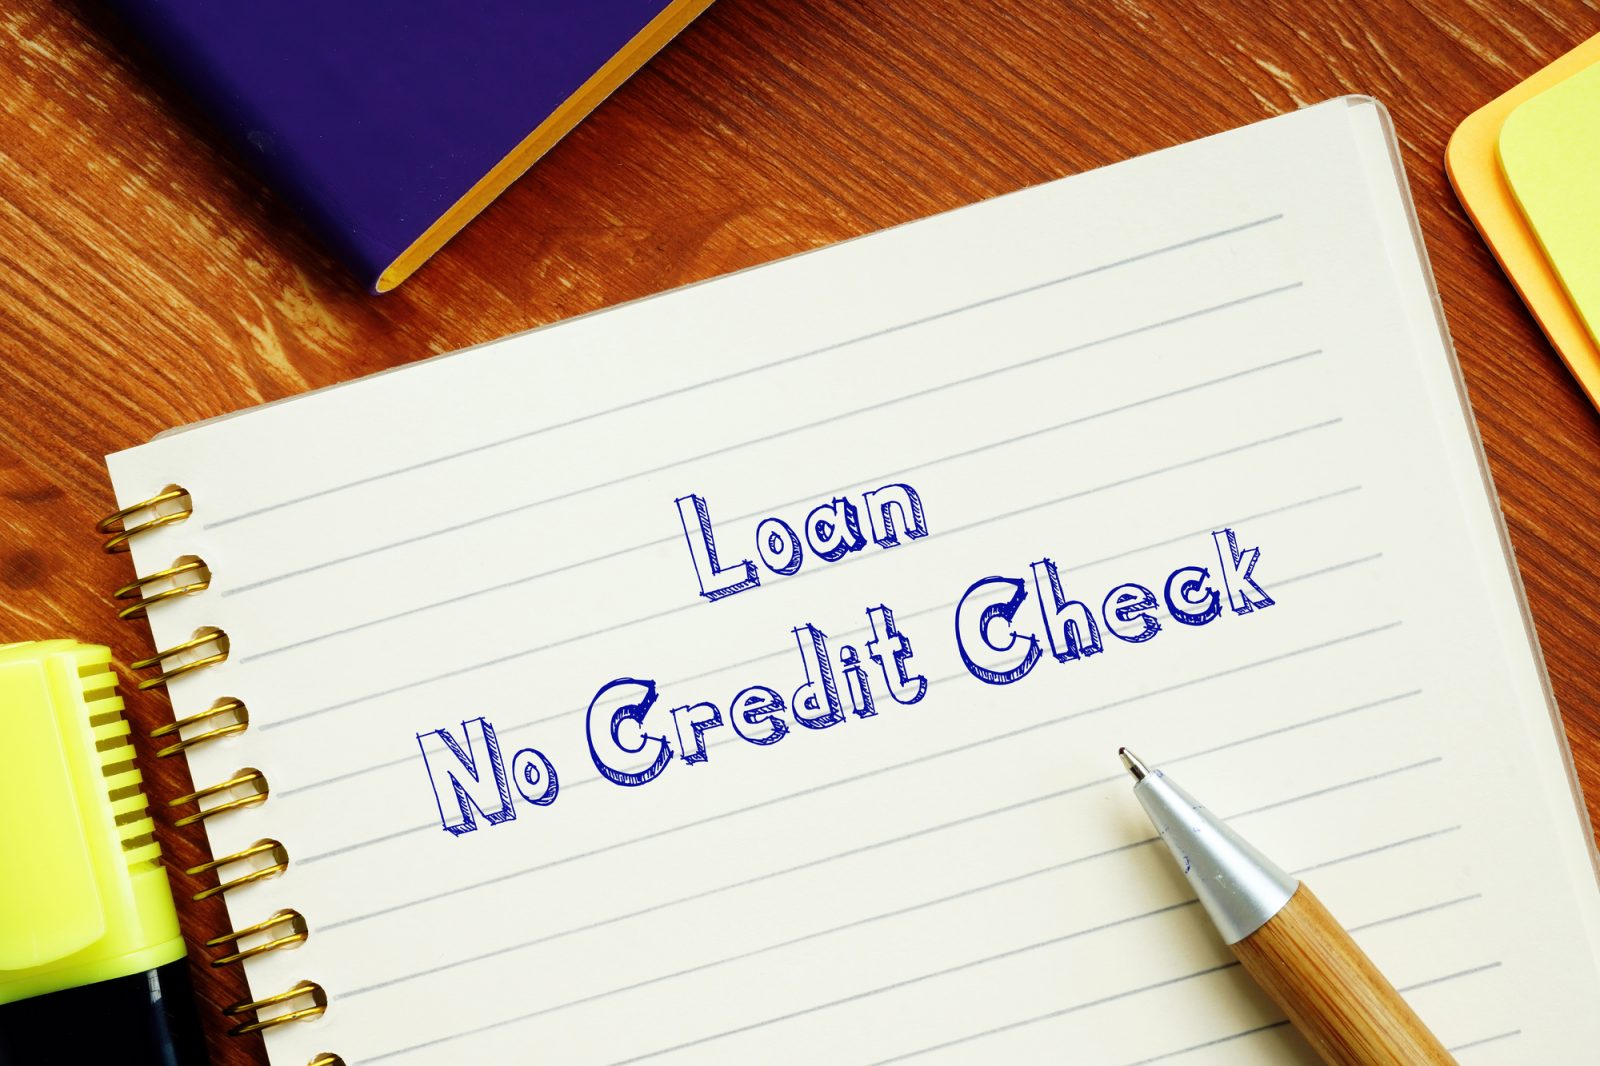 Everything You Need to Know About No Credit Check Loans